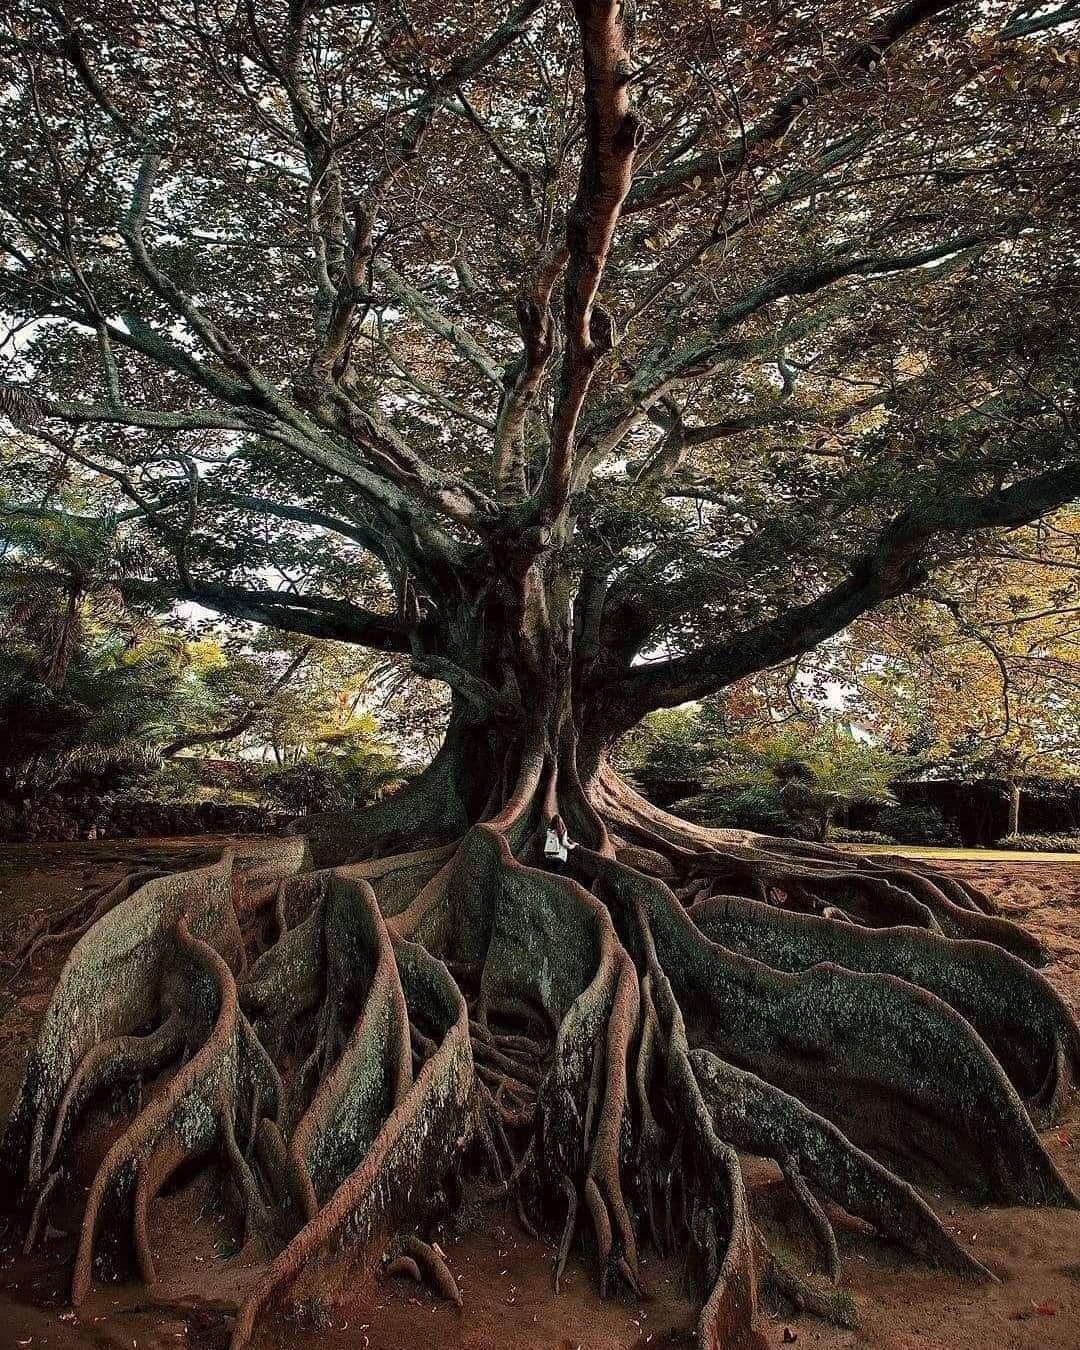 A Moreton Bay Fig tree, photographed within the Nationwide Tropical Botanical Garden in Kauai, Hawaii.